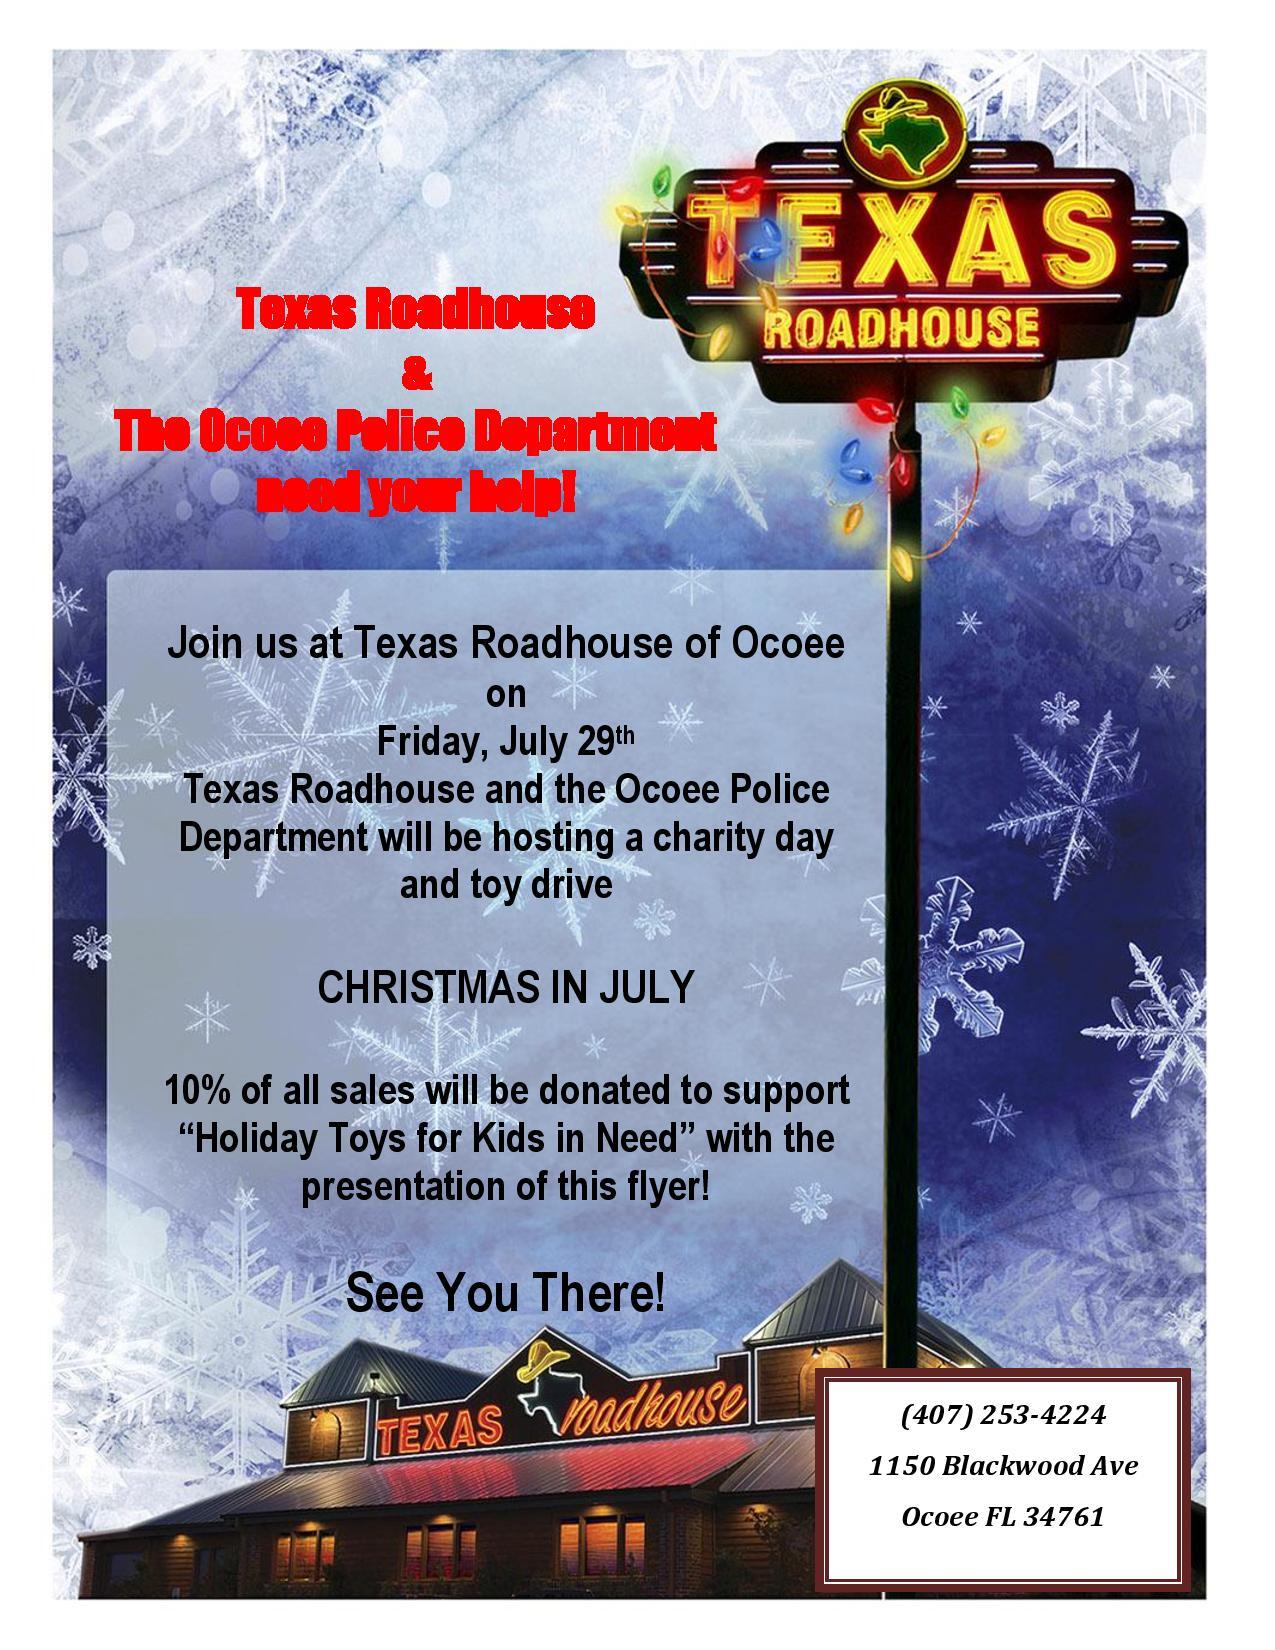 Christmas in July Toys for Kids in Need Program Join us at Texas Roadhouse July 29 Ocoee Police Department